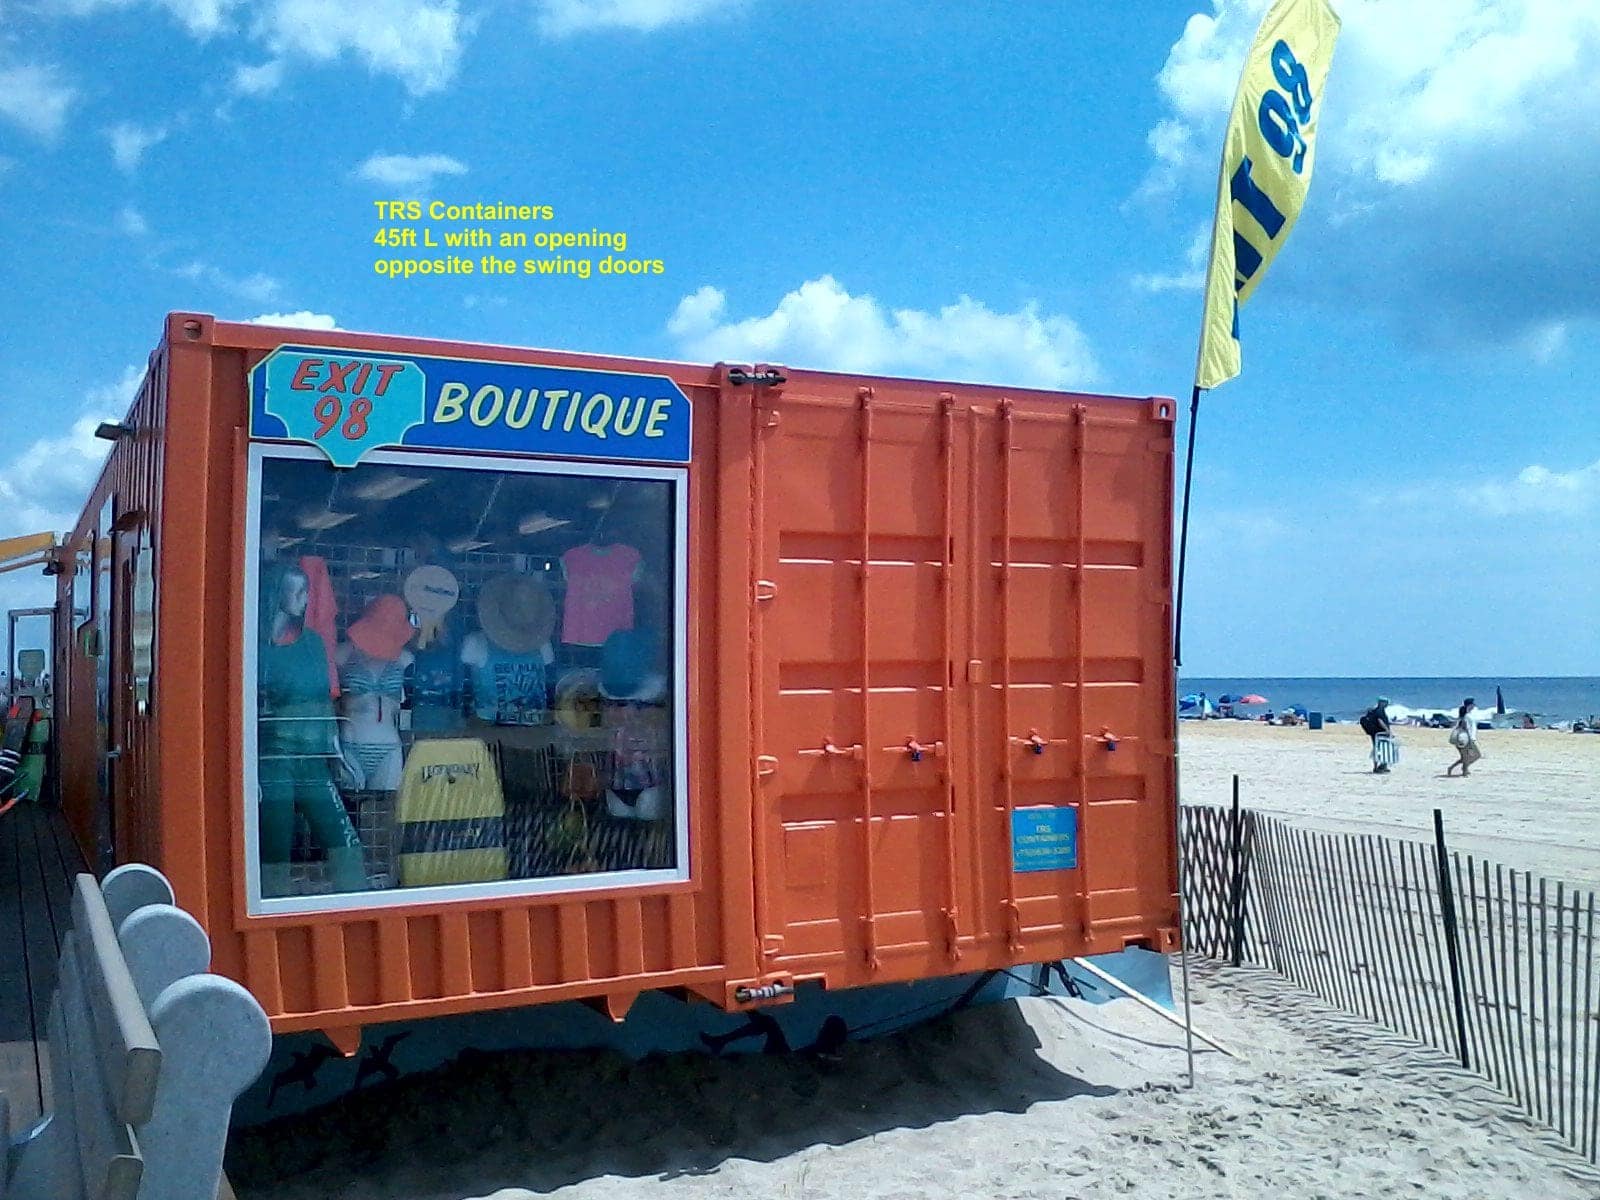 TRS Containers can build container homes, stores, restaurants and bars